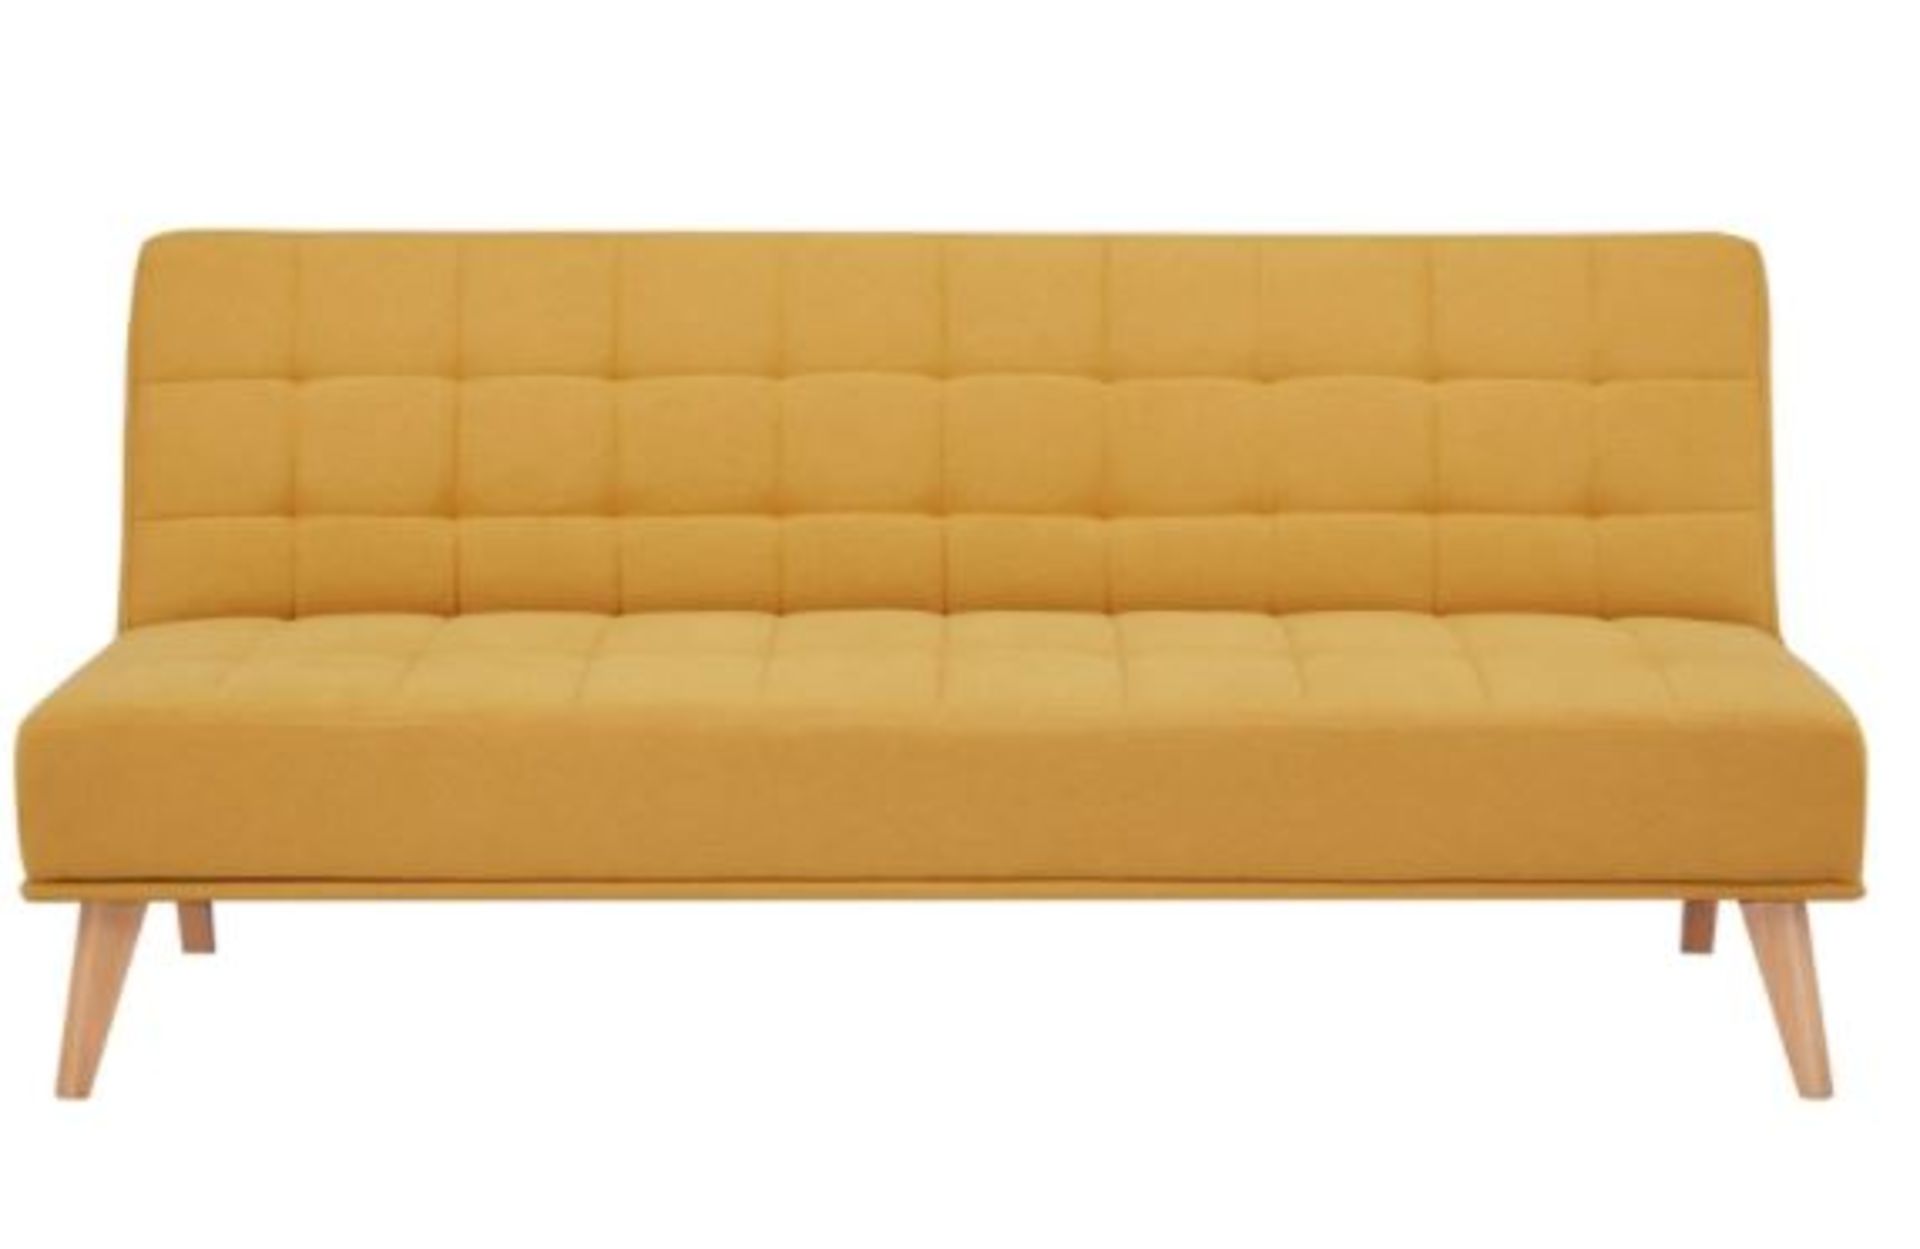 1 X Click Clack Kelly Sofa Bed Ochre. Wooden Frame With Solid Birchwood Legs. 100% Polyester Fabric - Image 3 of 9